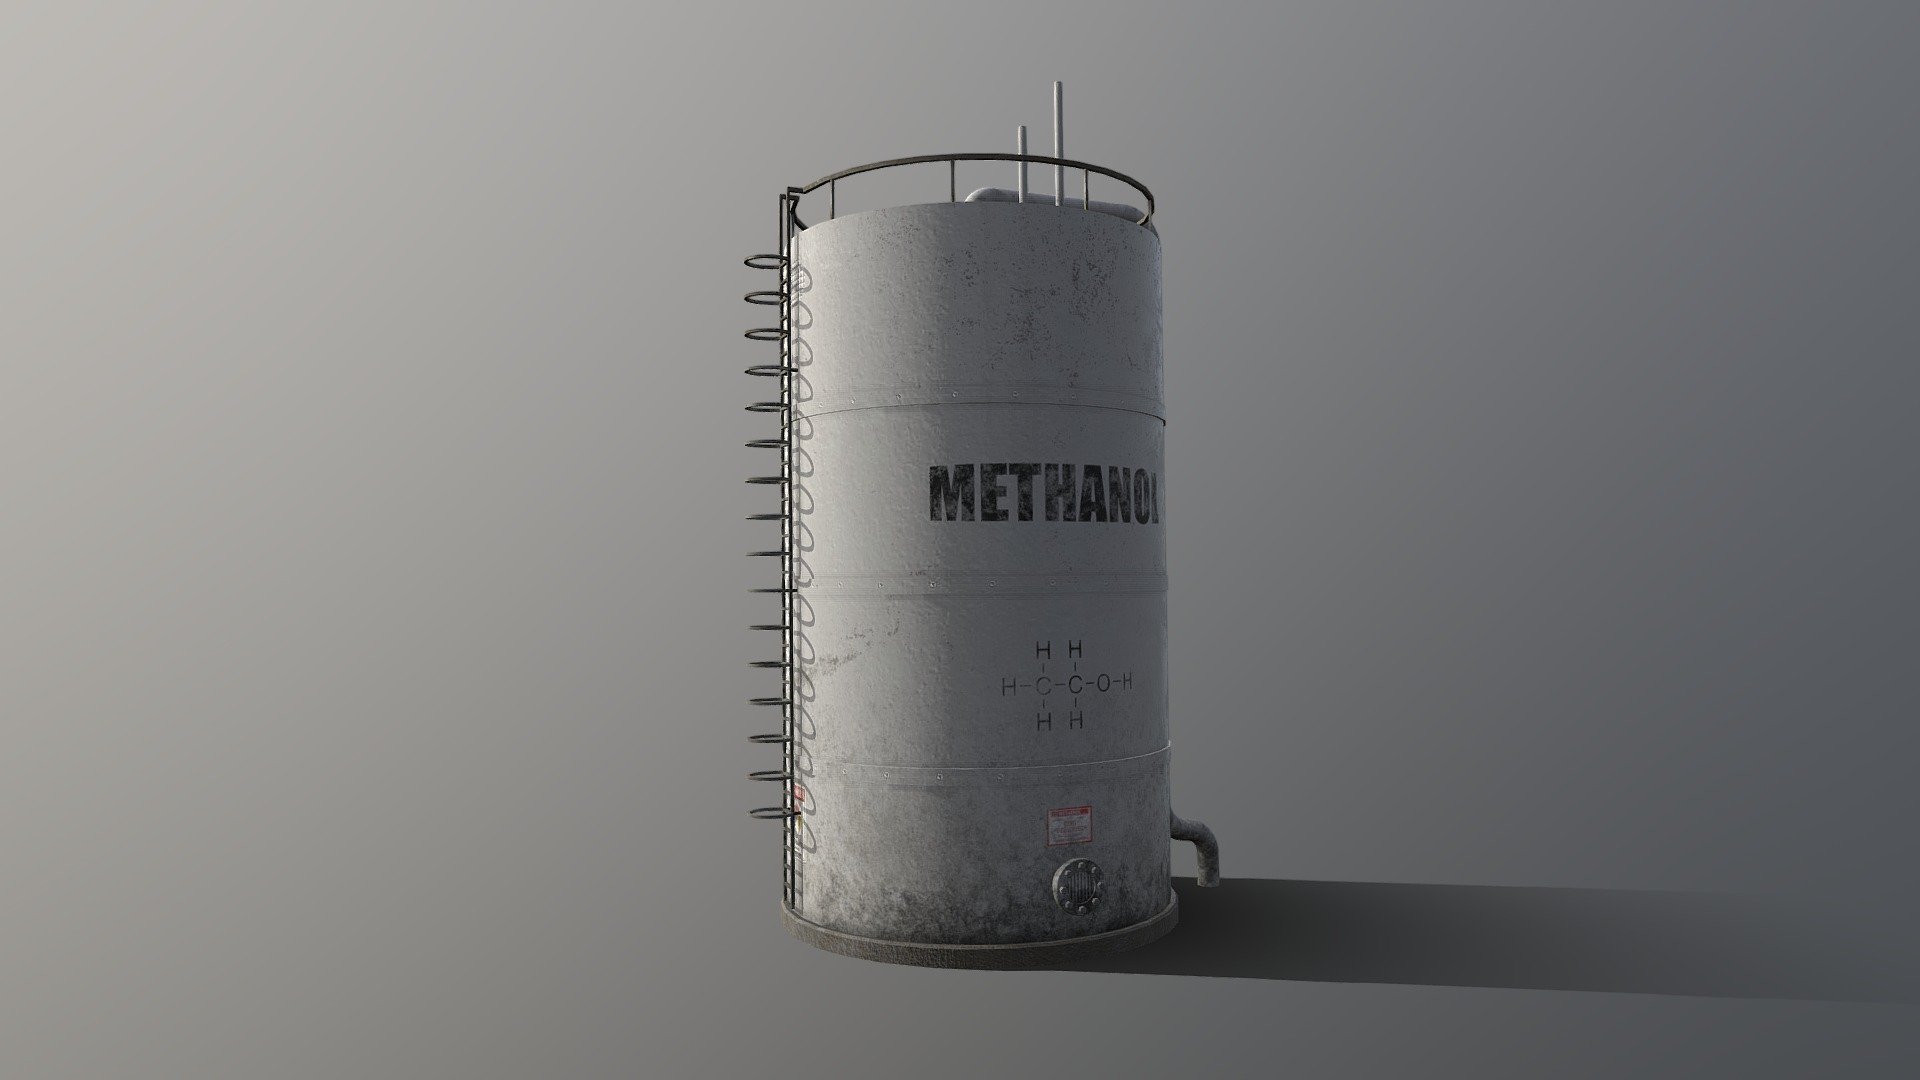 Methanol Industrial Storage Tank

Created in Blender 2.79/2.80

Textured in Substance Painter 2

2K Resolution

BaseColor, Metallic, Roughness, Normal Maps + Height Map if you wish to use that also

Low Poly Model

Tested in 2.80 with the EEVEE Render engine

Nice Asset for your project

Detailed Model

Easily duplicate this Model for a rack of tanks to fill out your scene

Please note if you are using EEVEE:

You may need to go into the Render Properties Tab - Performance - Enable High Quality Normals

Approximate Real World Scale Applied

3 Formats provided:  .blend , Fbx , Obj  + All Textures

Thanks for your interest &amp; support!

MagicCGIStudios - Methanol Industrial Storage Tank - Buy Royalty Free 3D model by MagicCGIStudios 3d model